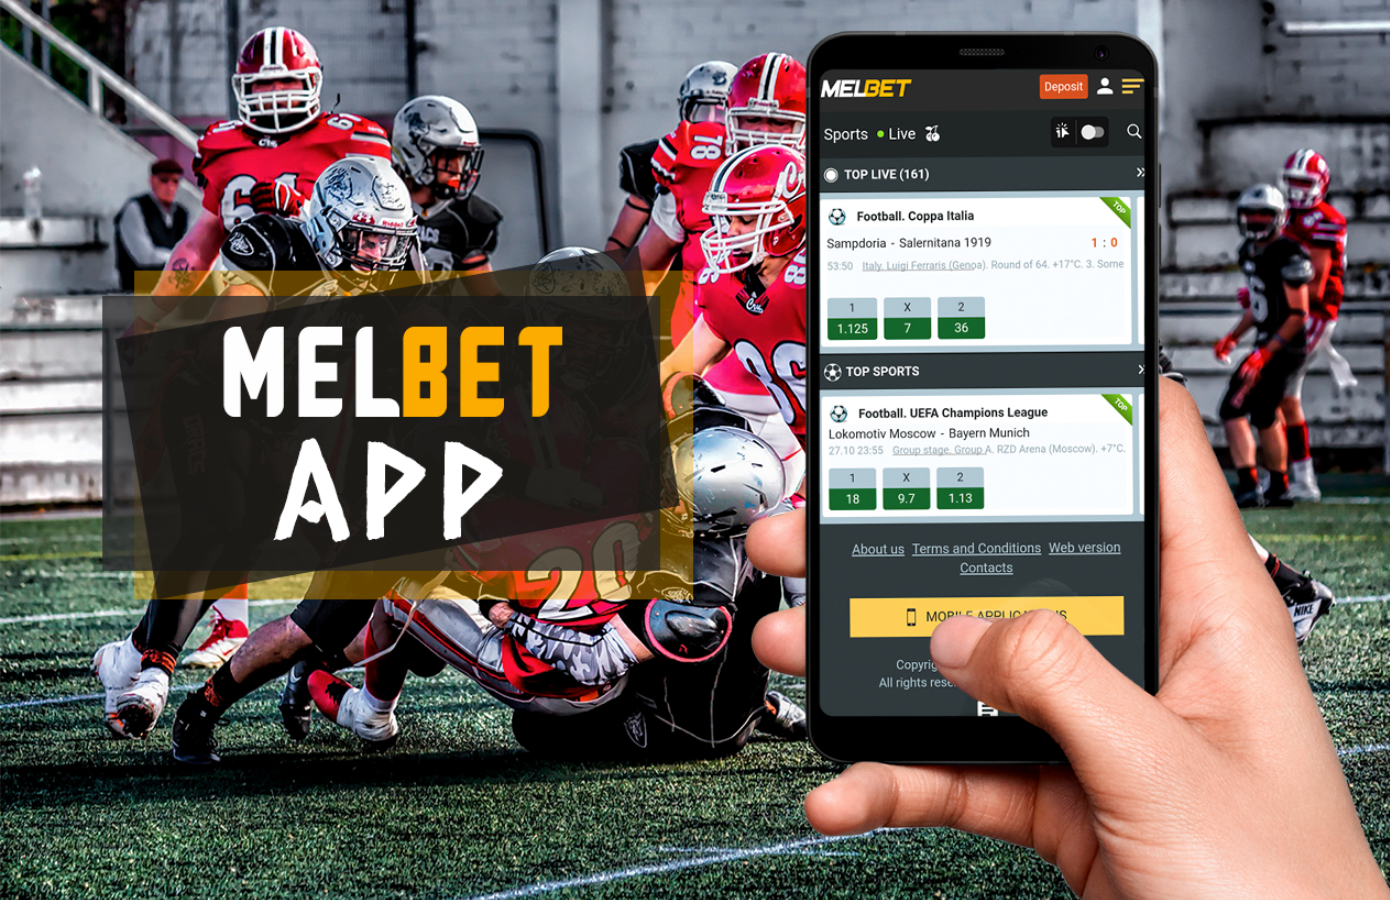 How to download the iOS app from the Melbet bookmaker